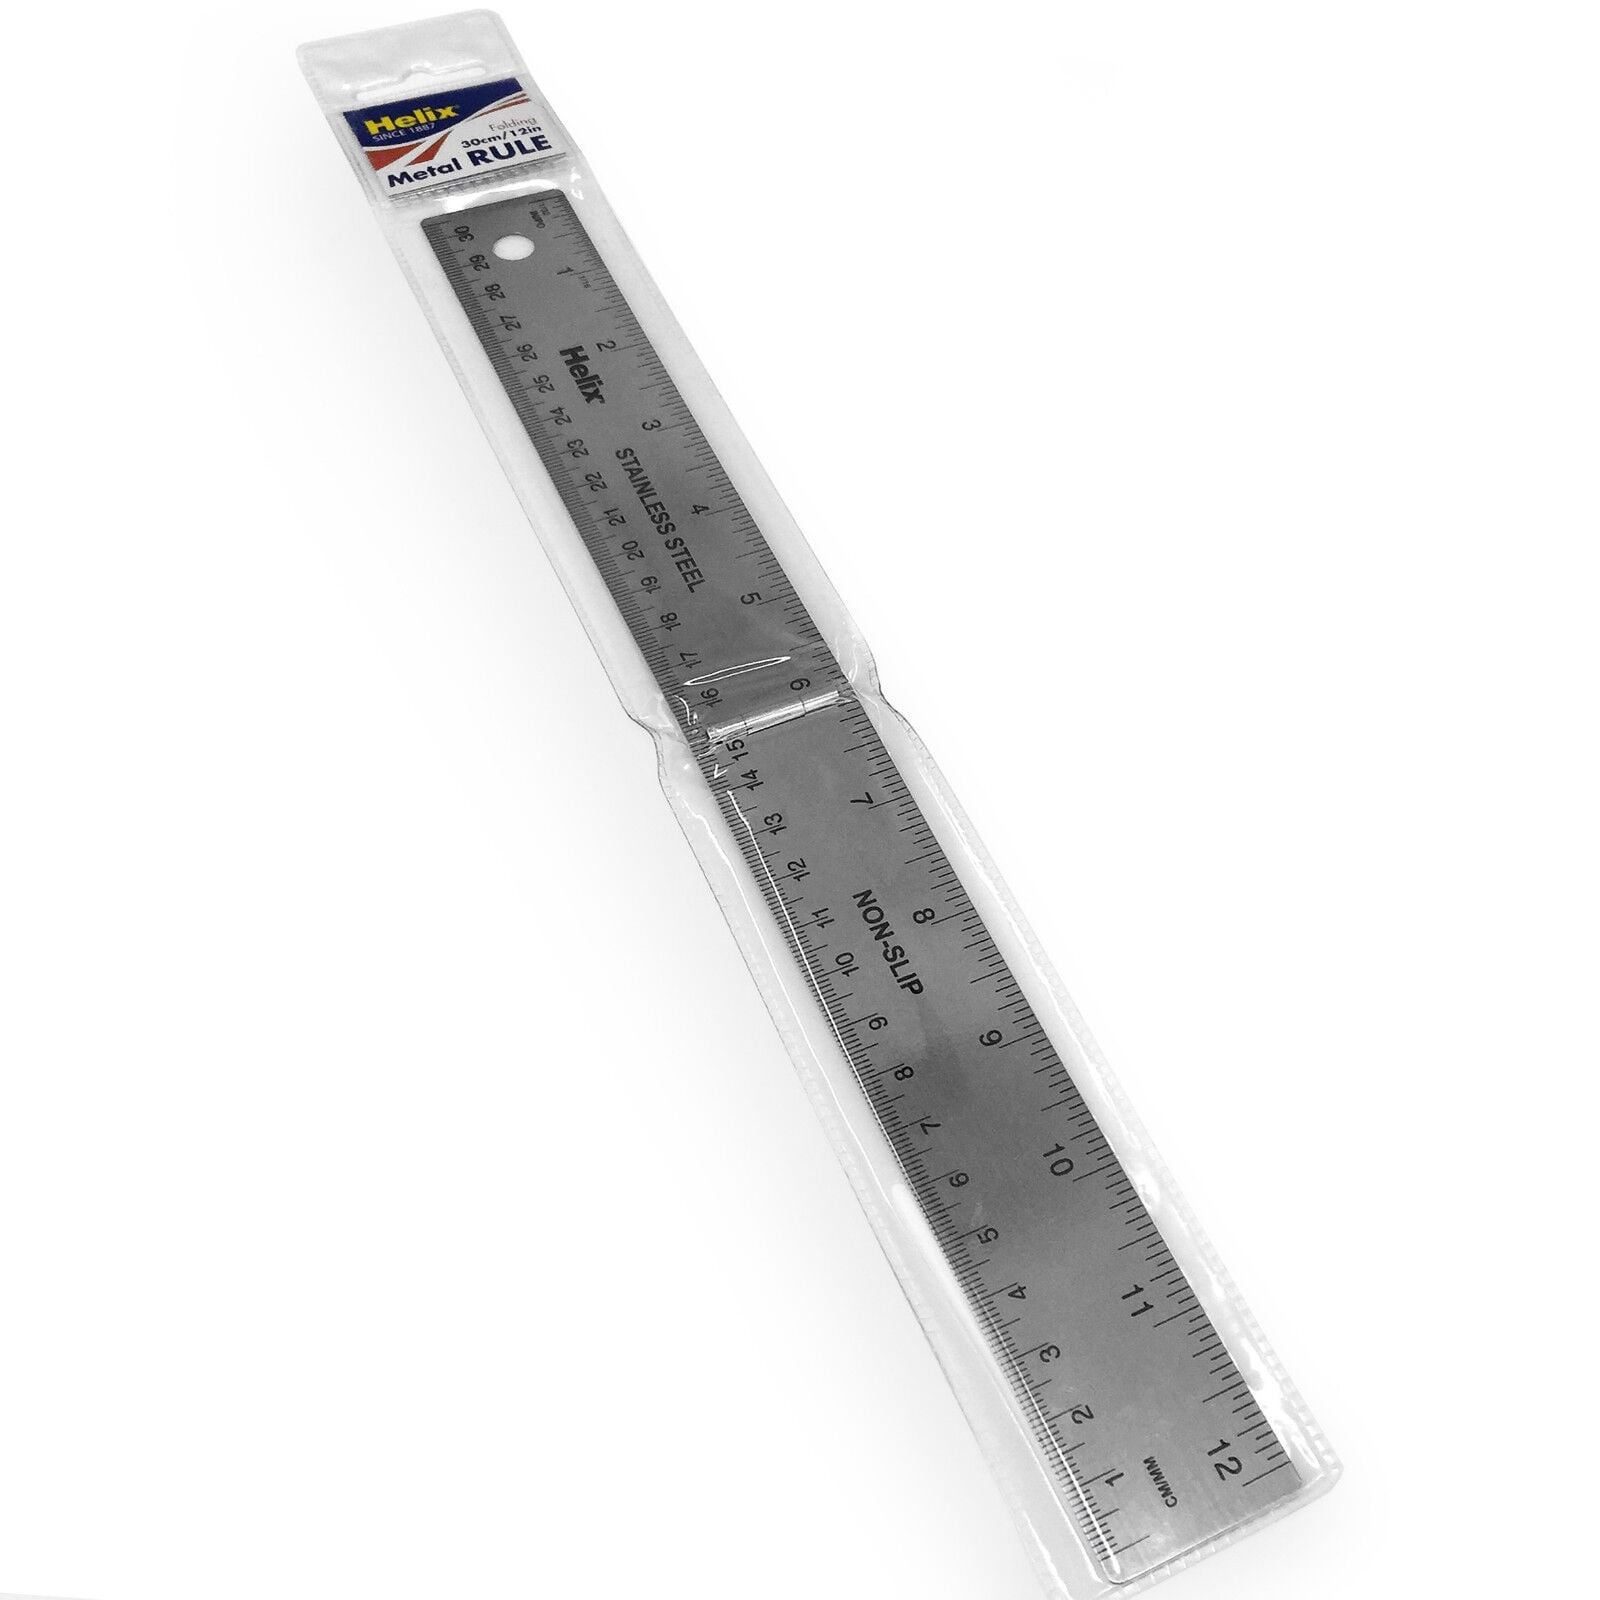 RULER HELIX METAL SAFETY RULER 12 IN HX32046